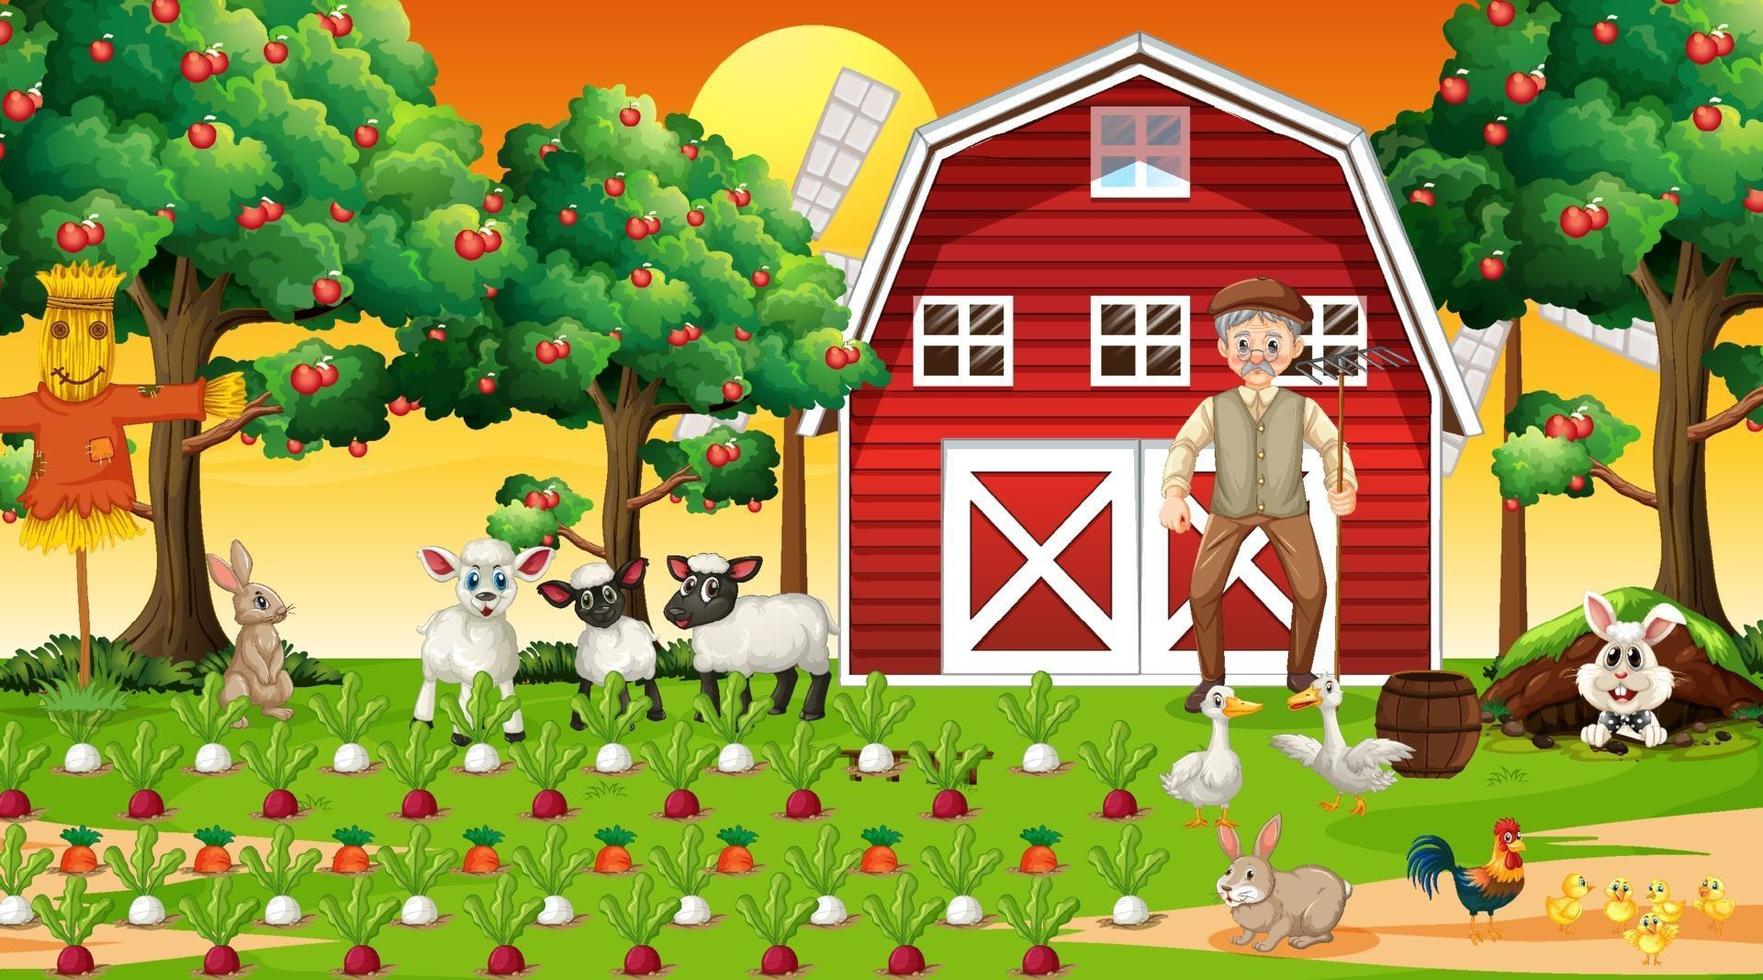 Farm scene at sunset with old farmer man and cute animals vector